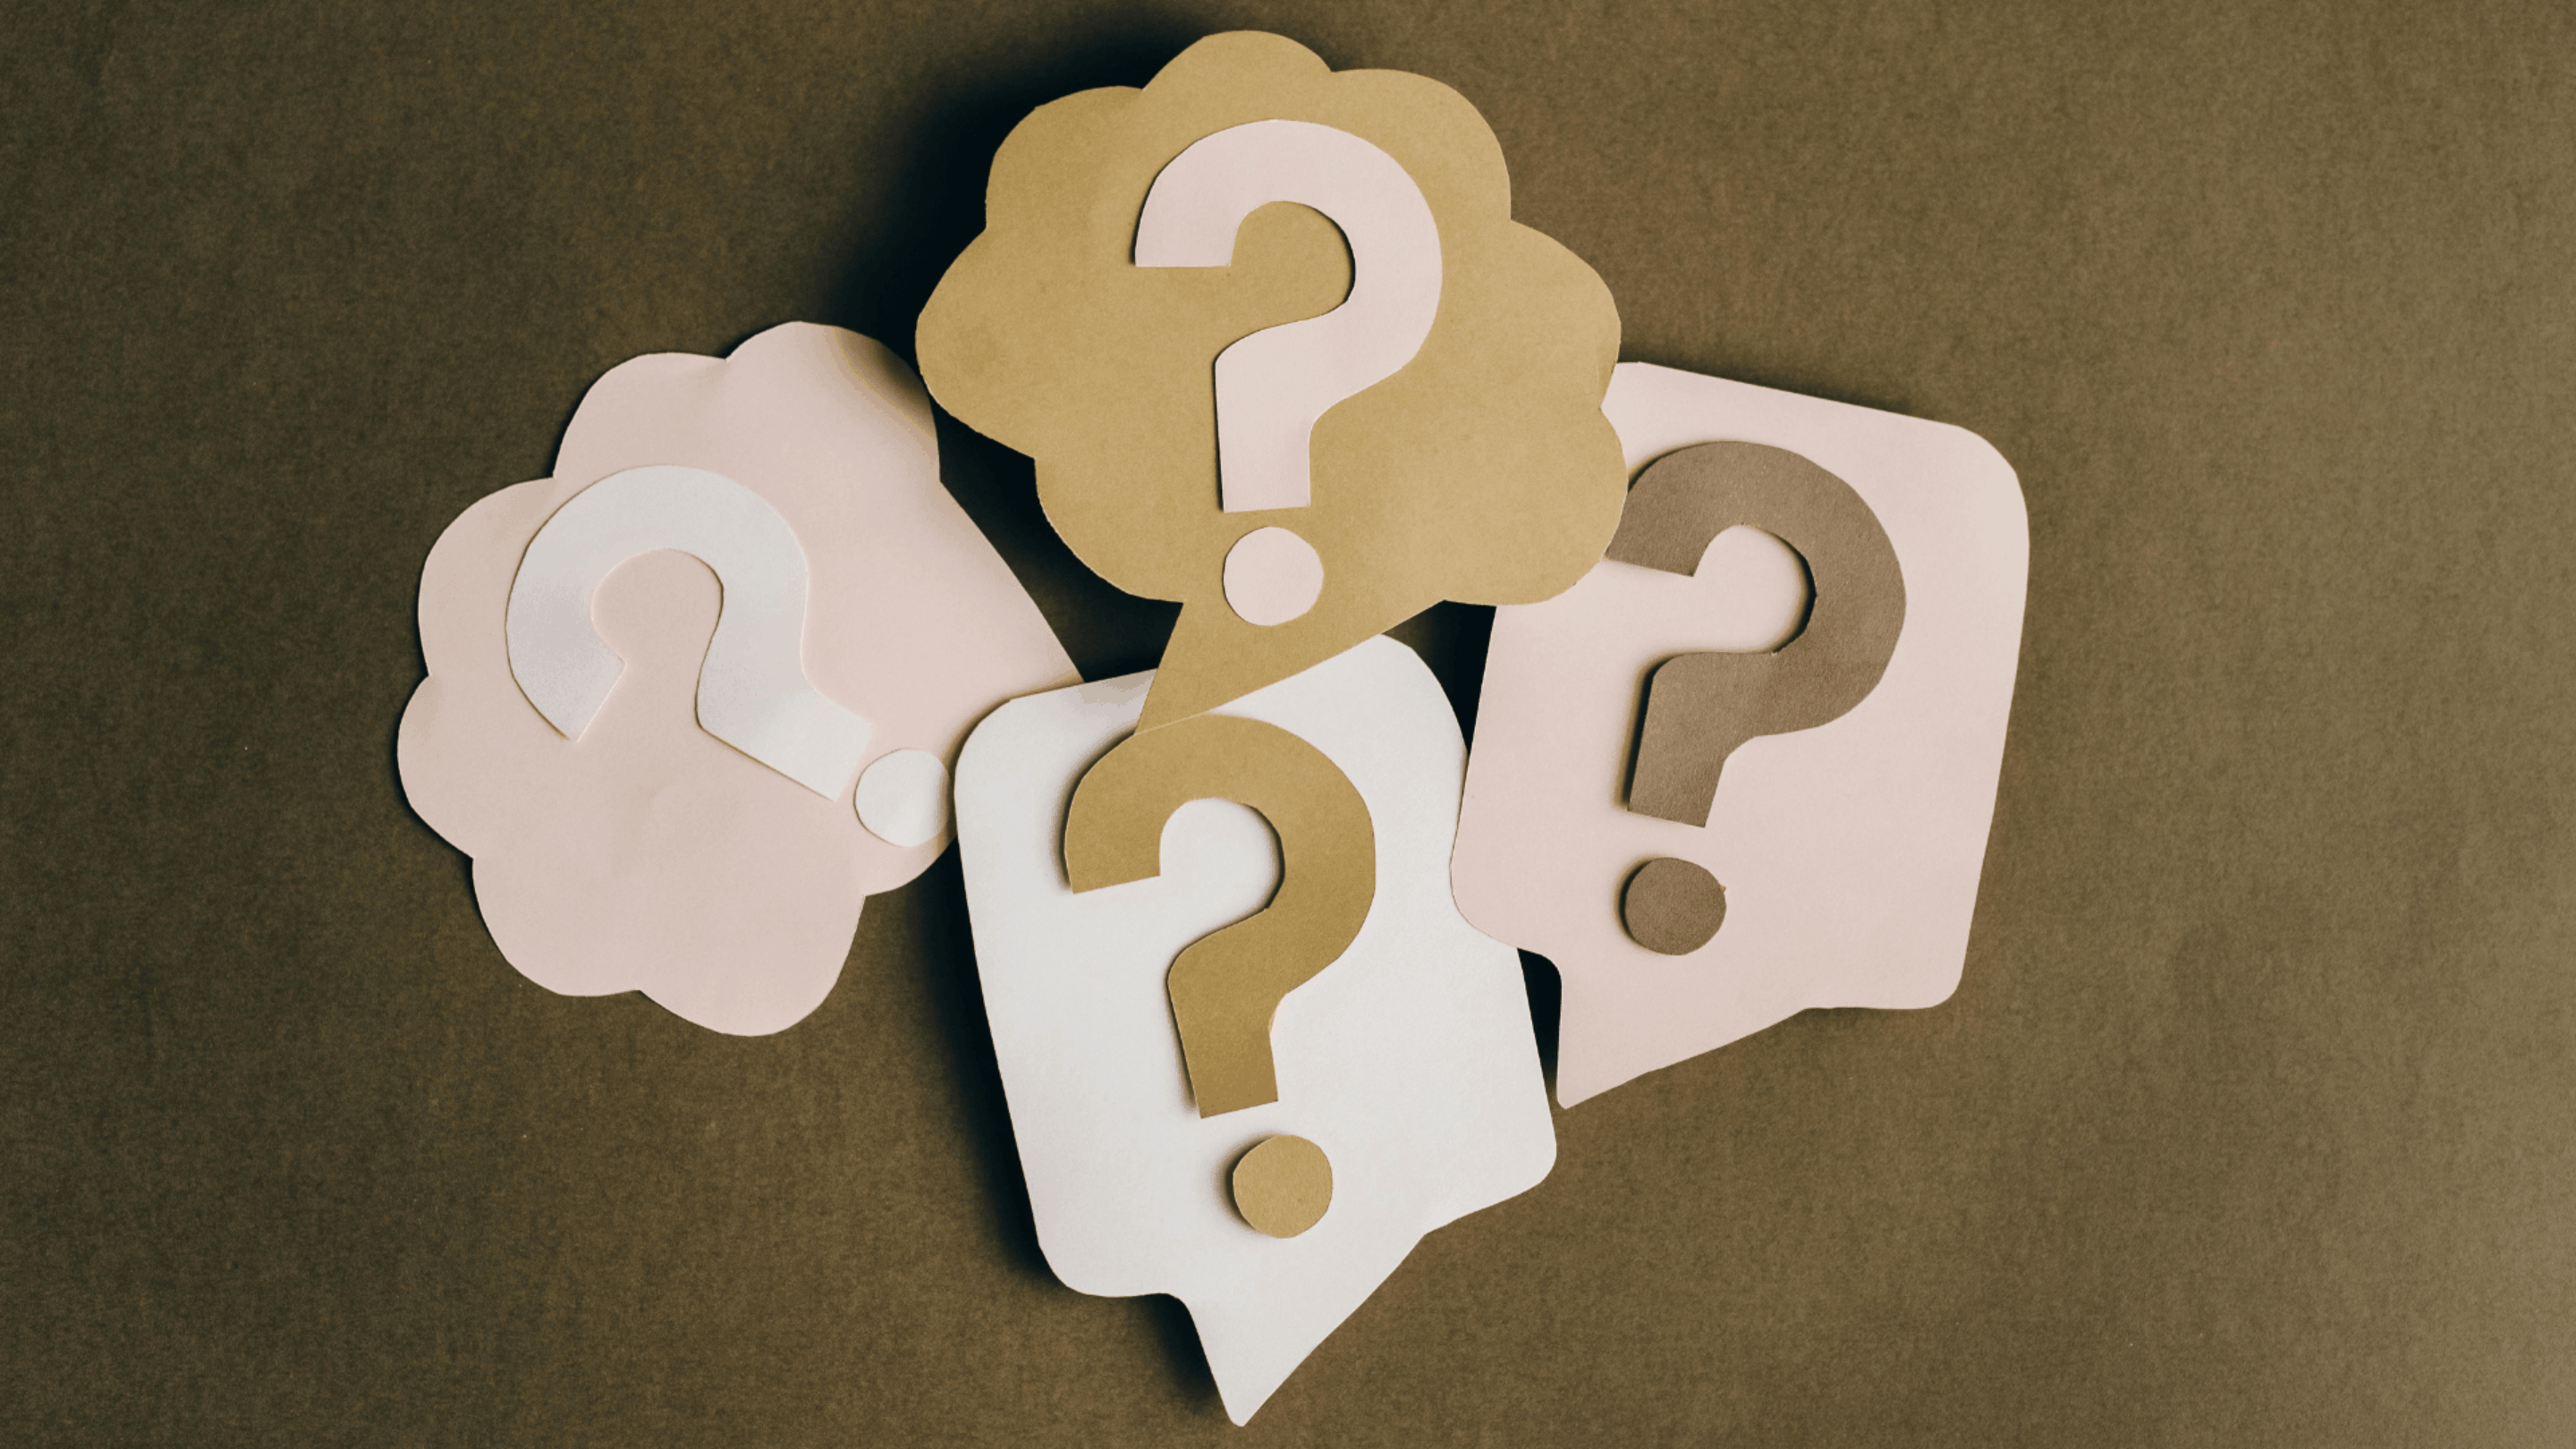 A bunch of question marks in a combination of thought or speech bubbles, cut out of card and stacked upon each other Photography by Leeloo The First.